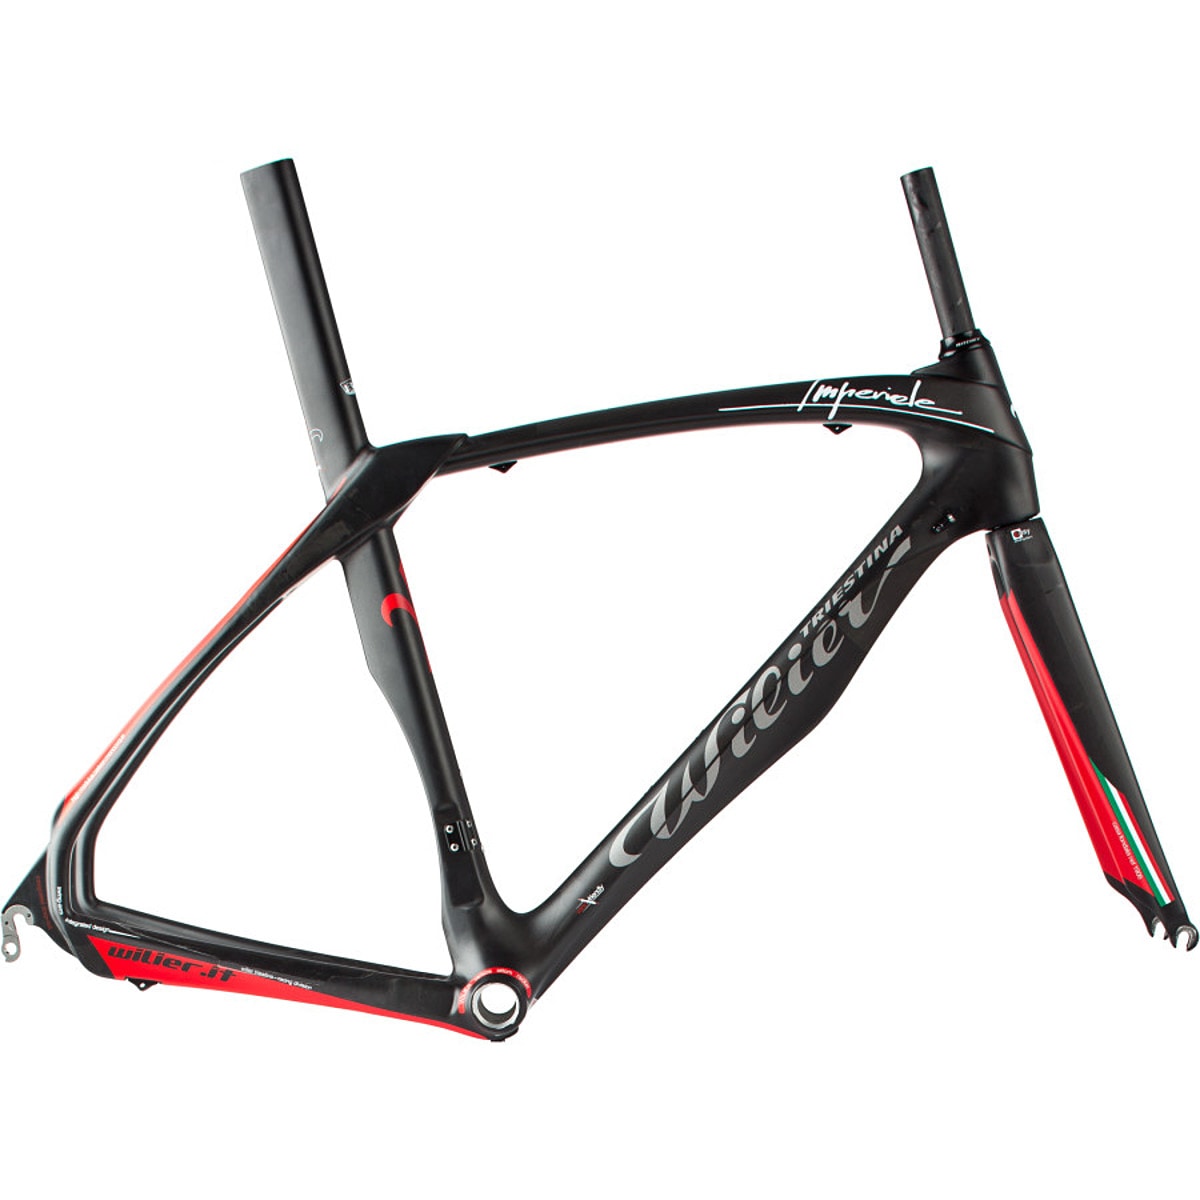 Wilier Imperiale - 2012